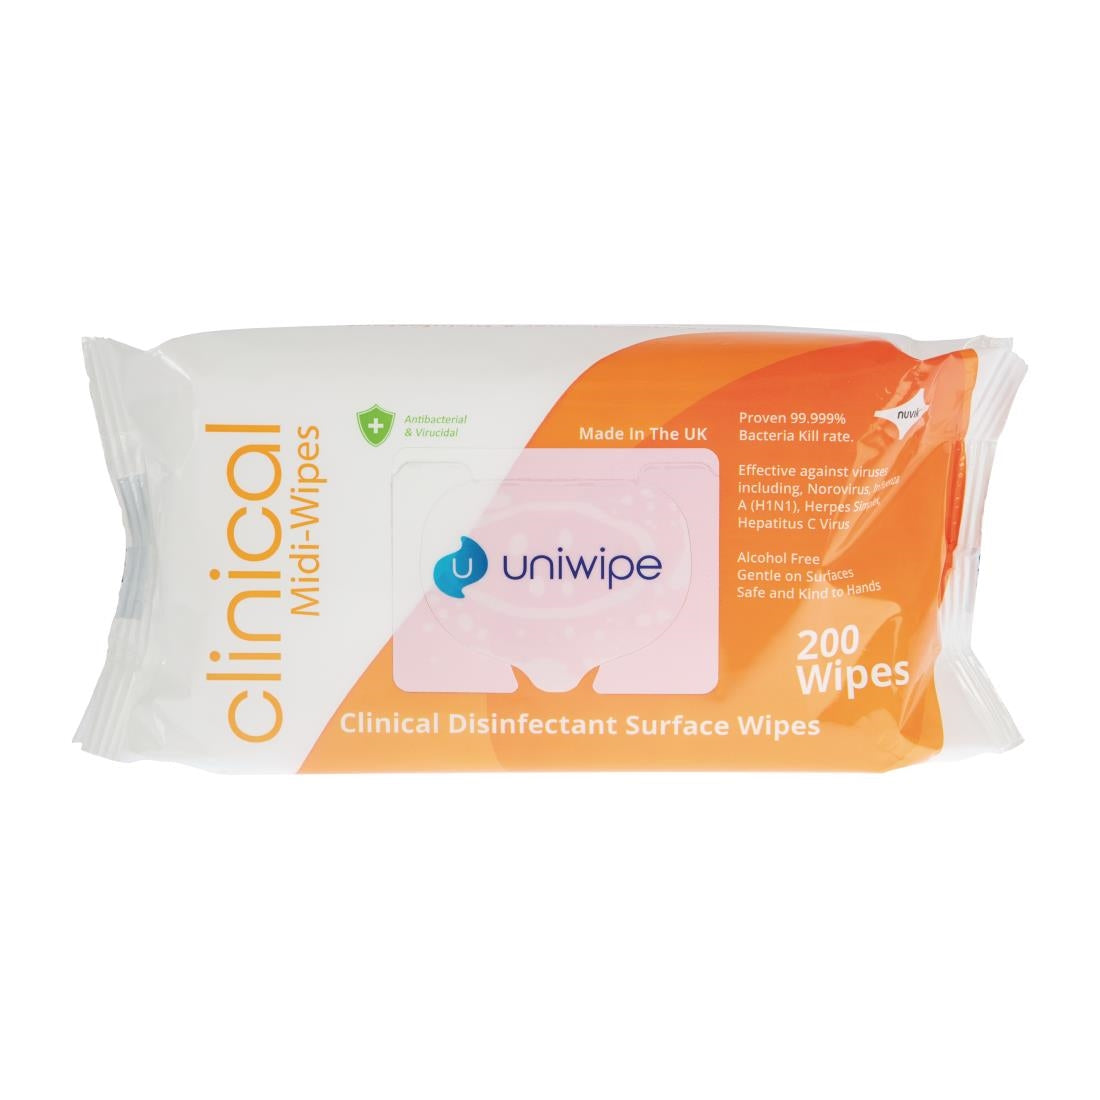 Uniwipe Clinical Disinfectant Surface Wipes (Pack of 200)